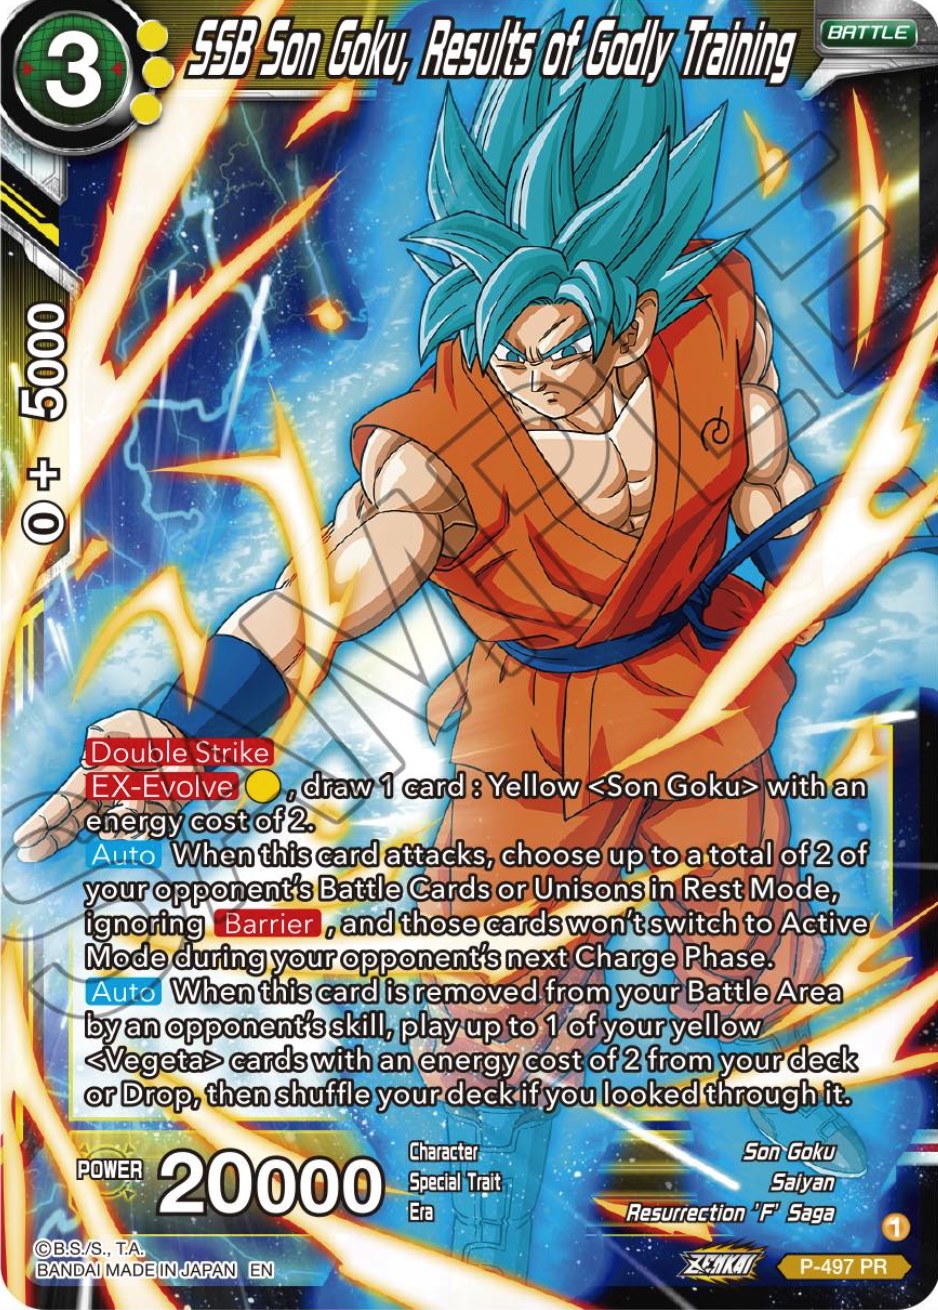 SSB Son Goku, Results of Godly Training (P-497) [Promotion Cards] | Pegasus Games WI